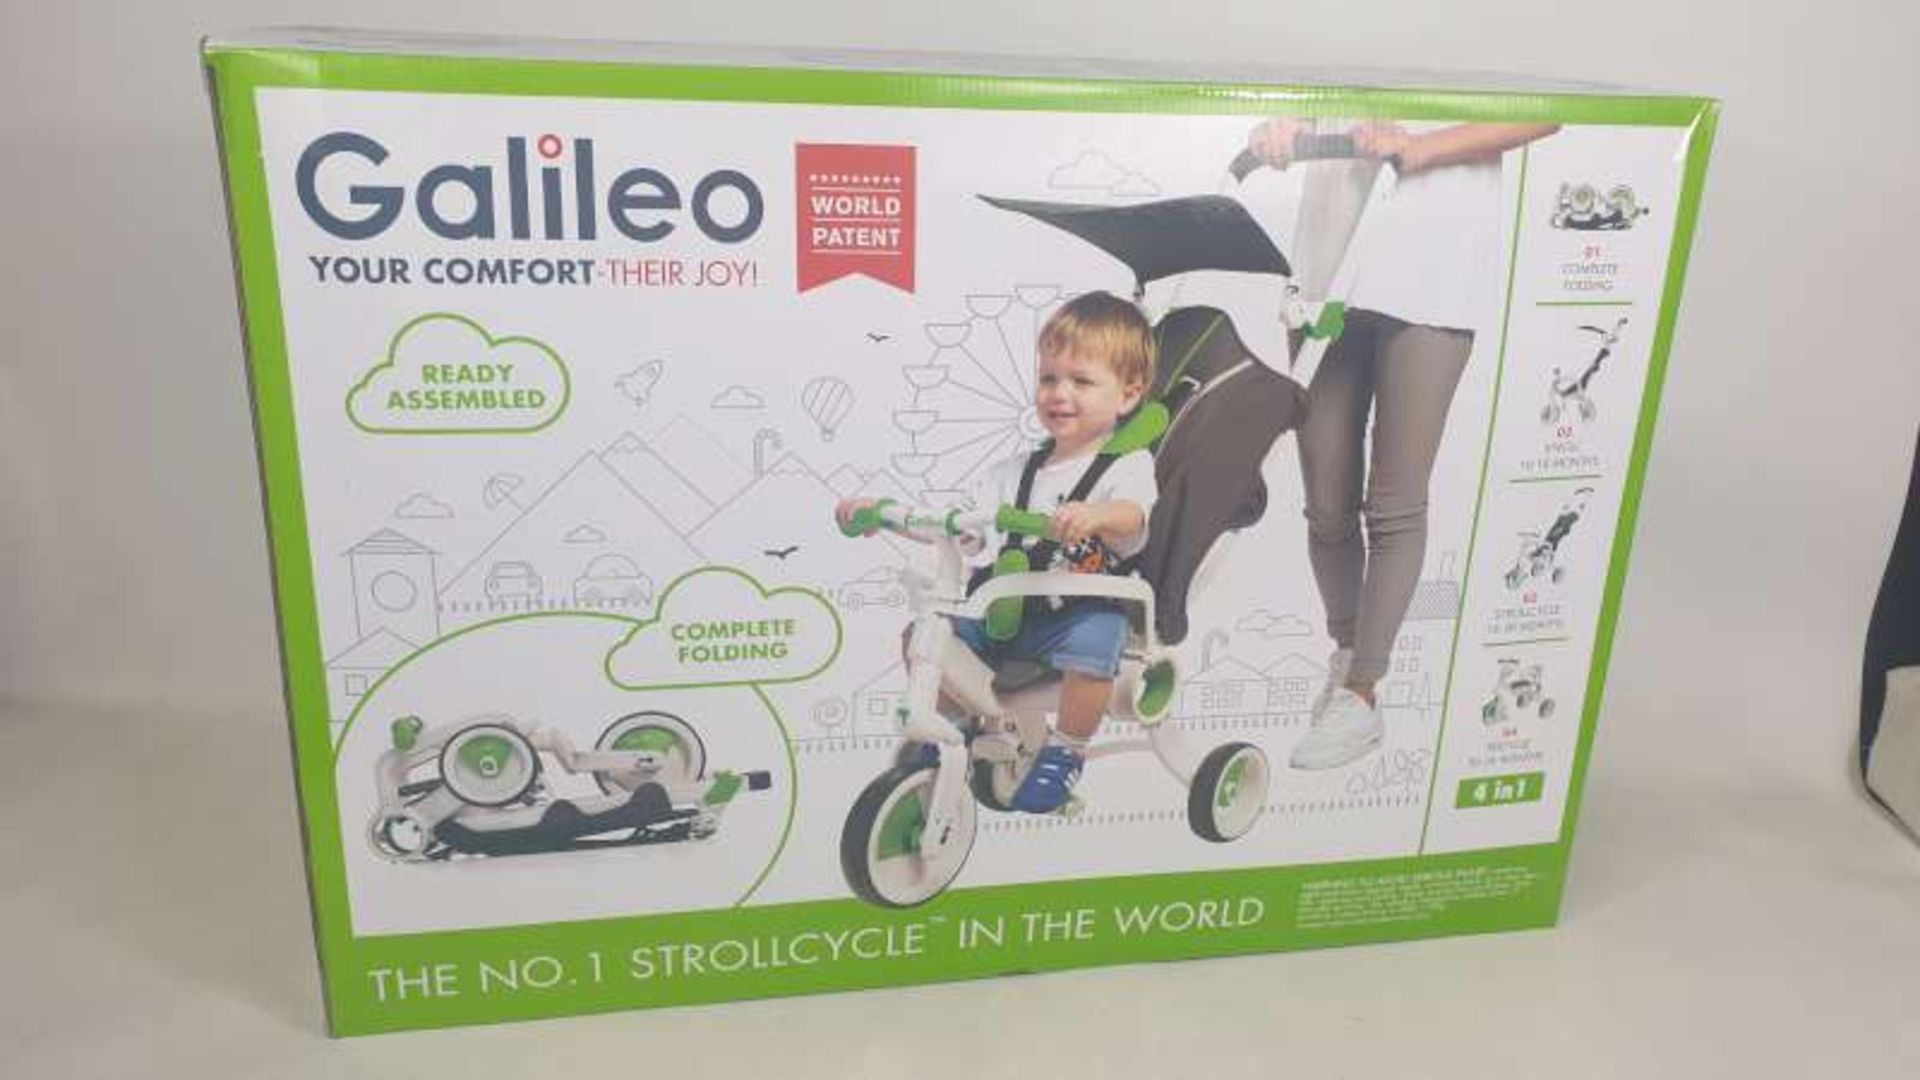 BRAND NEW BOXED GALILEO 4 IN 1 FOLDABLE STROLLCYCLE